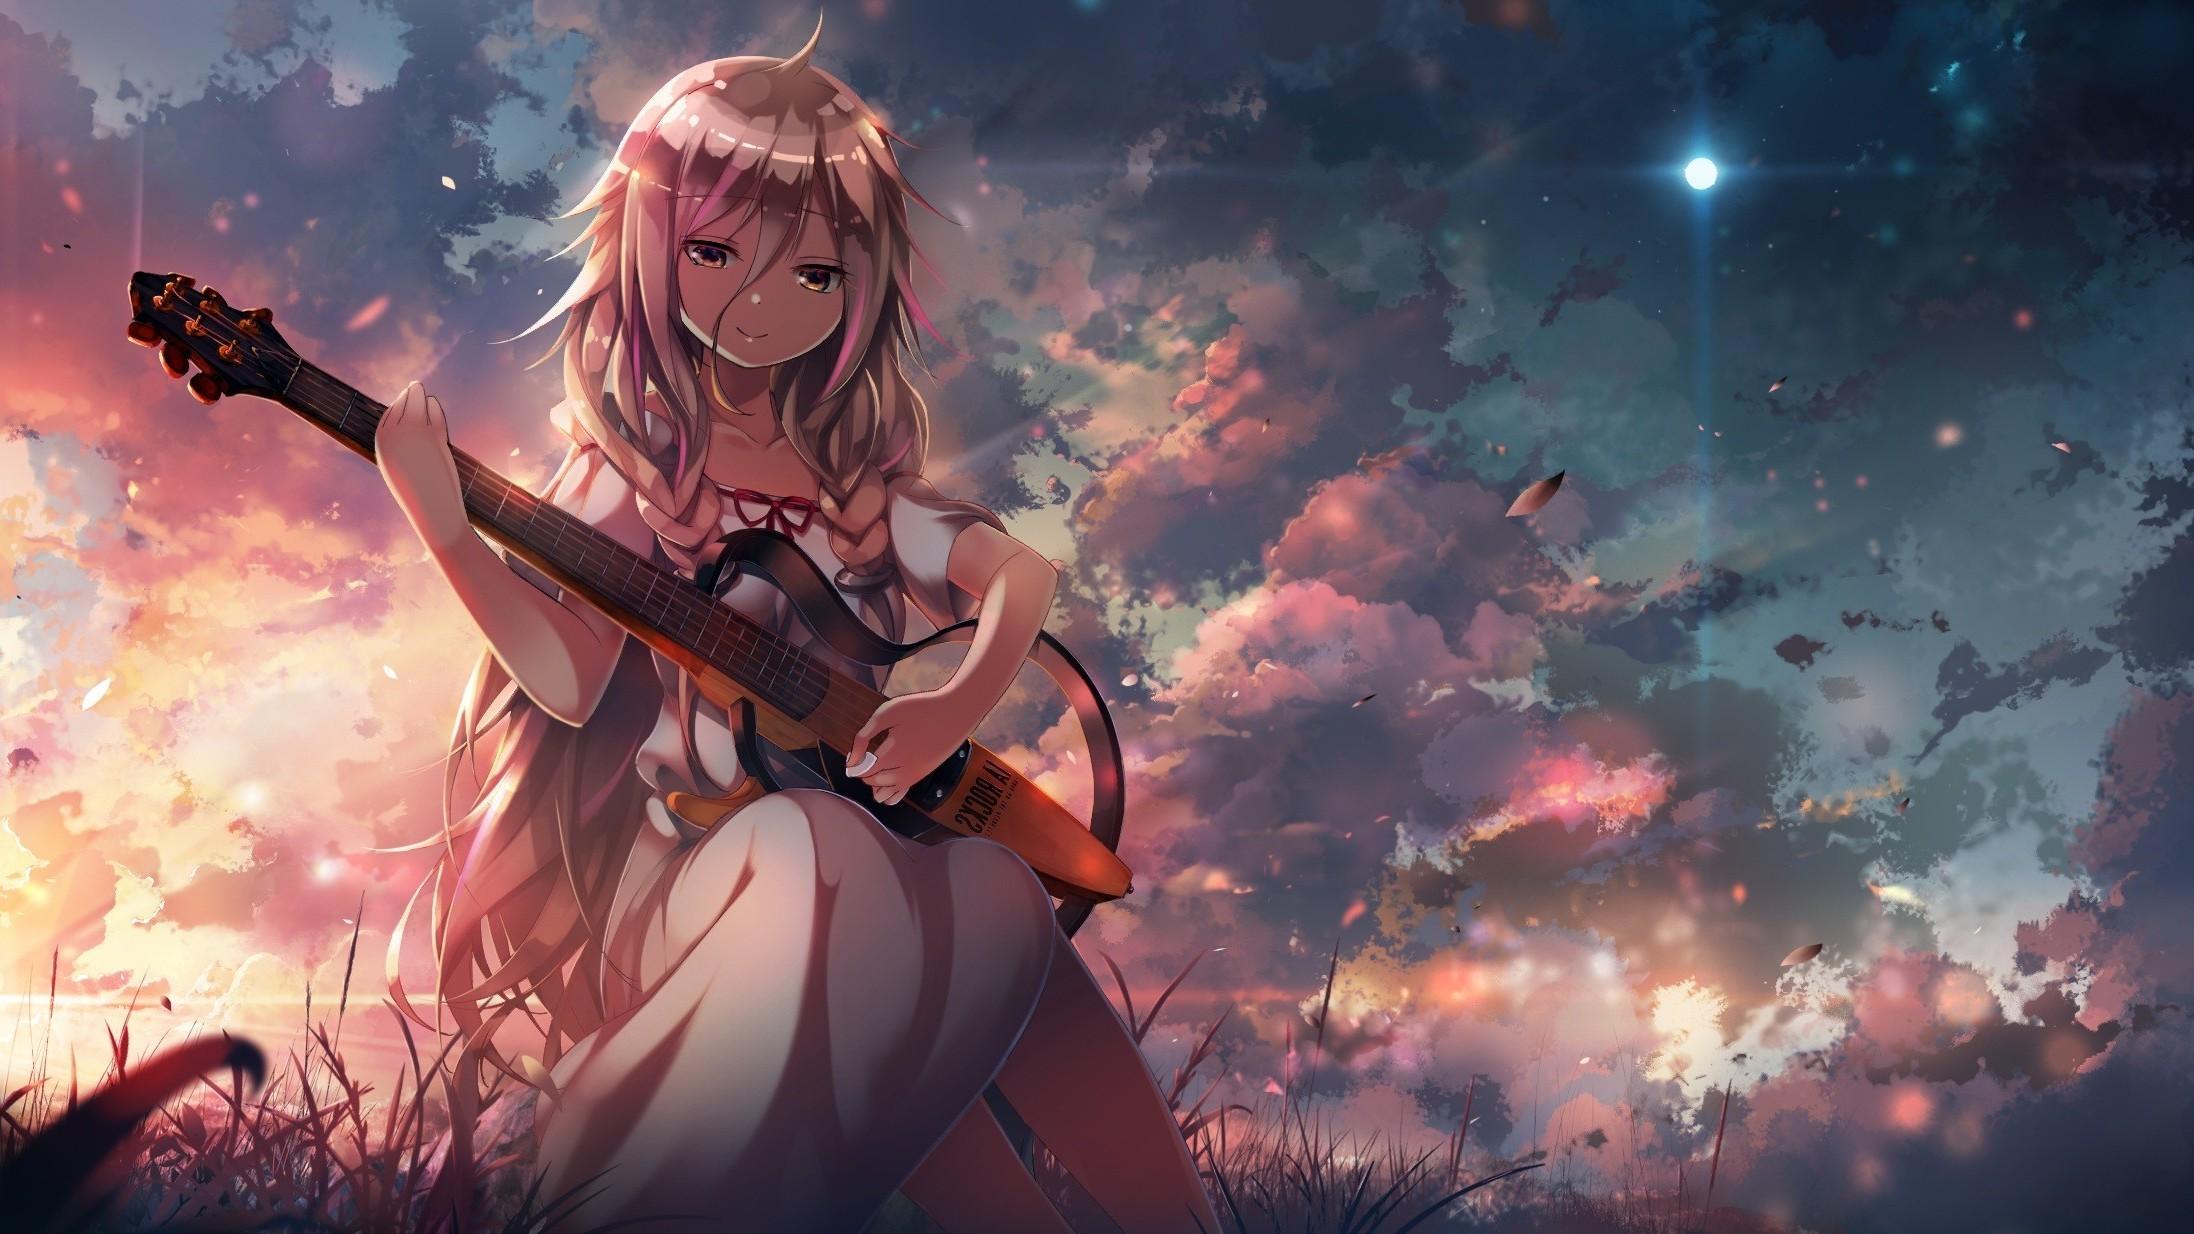 Nightcore Anime Wallpapers - Wallpaper Cave